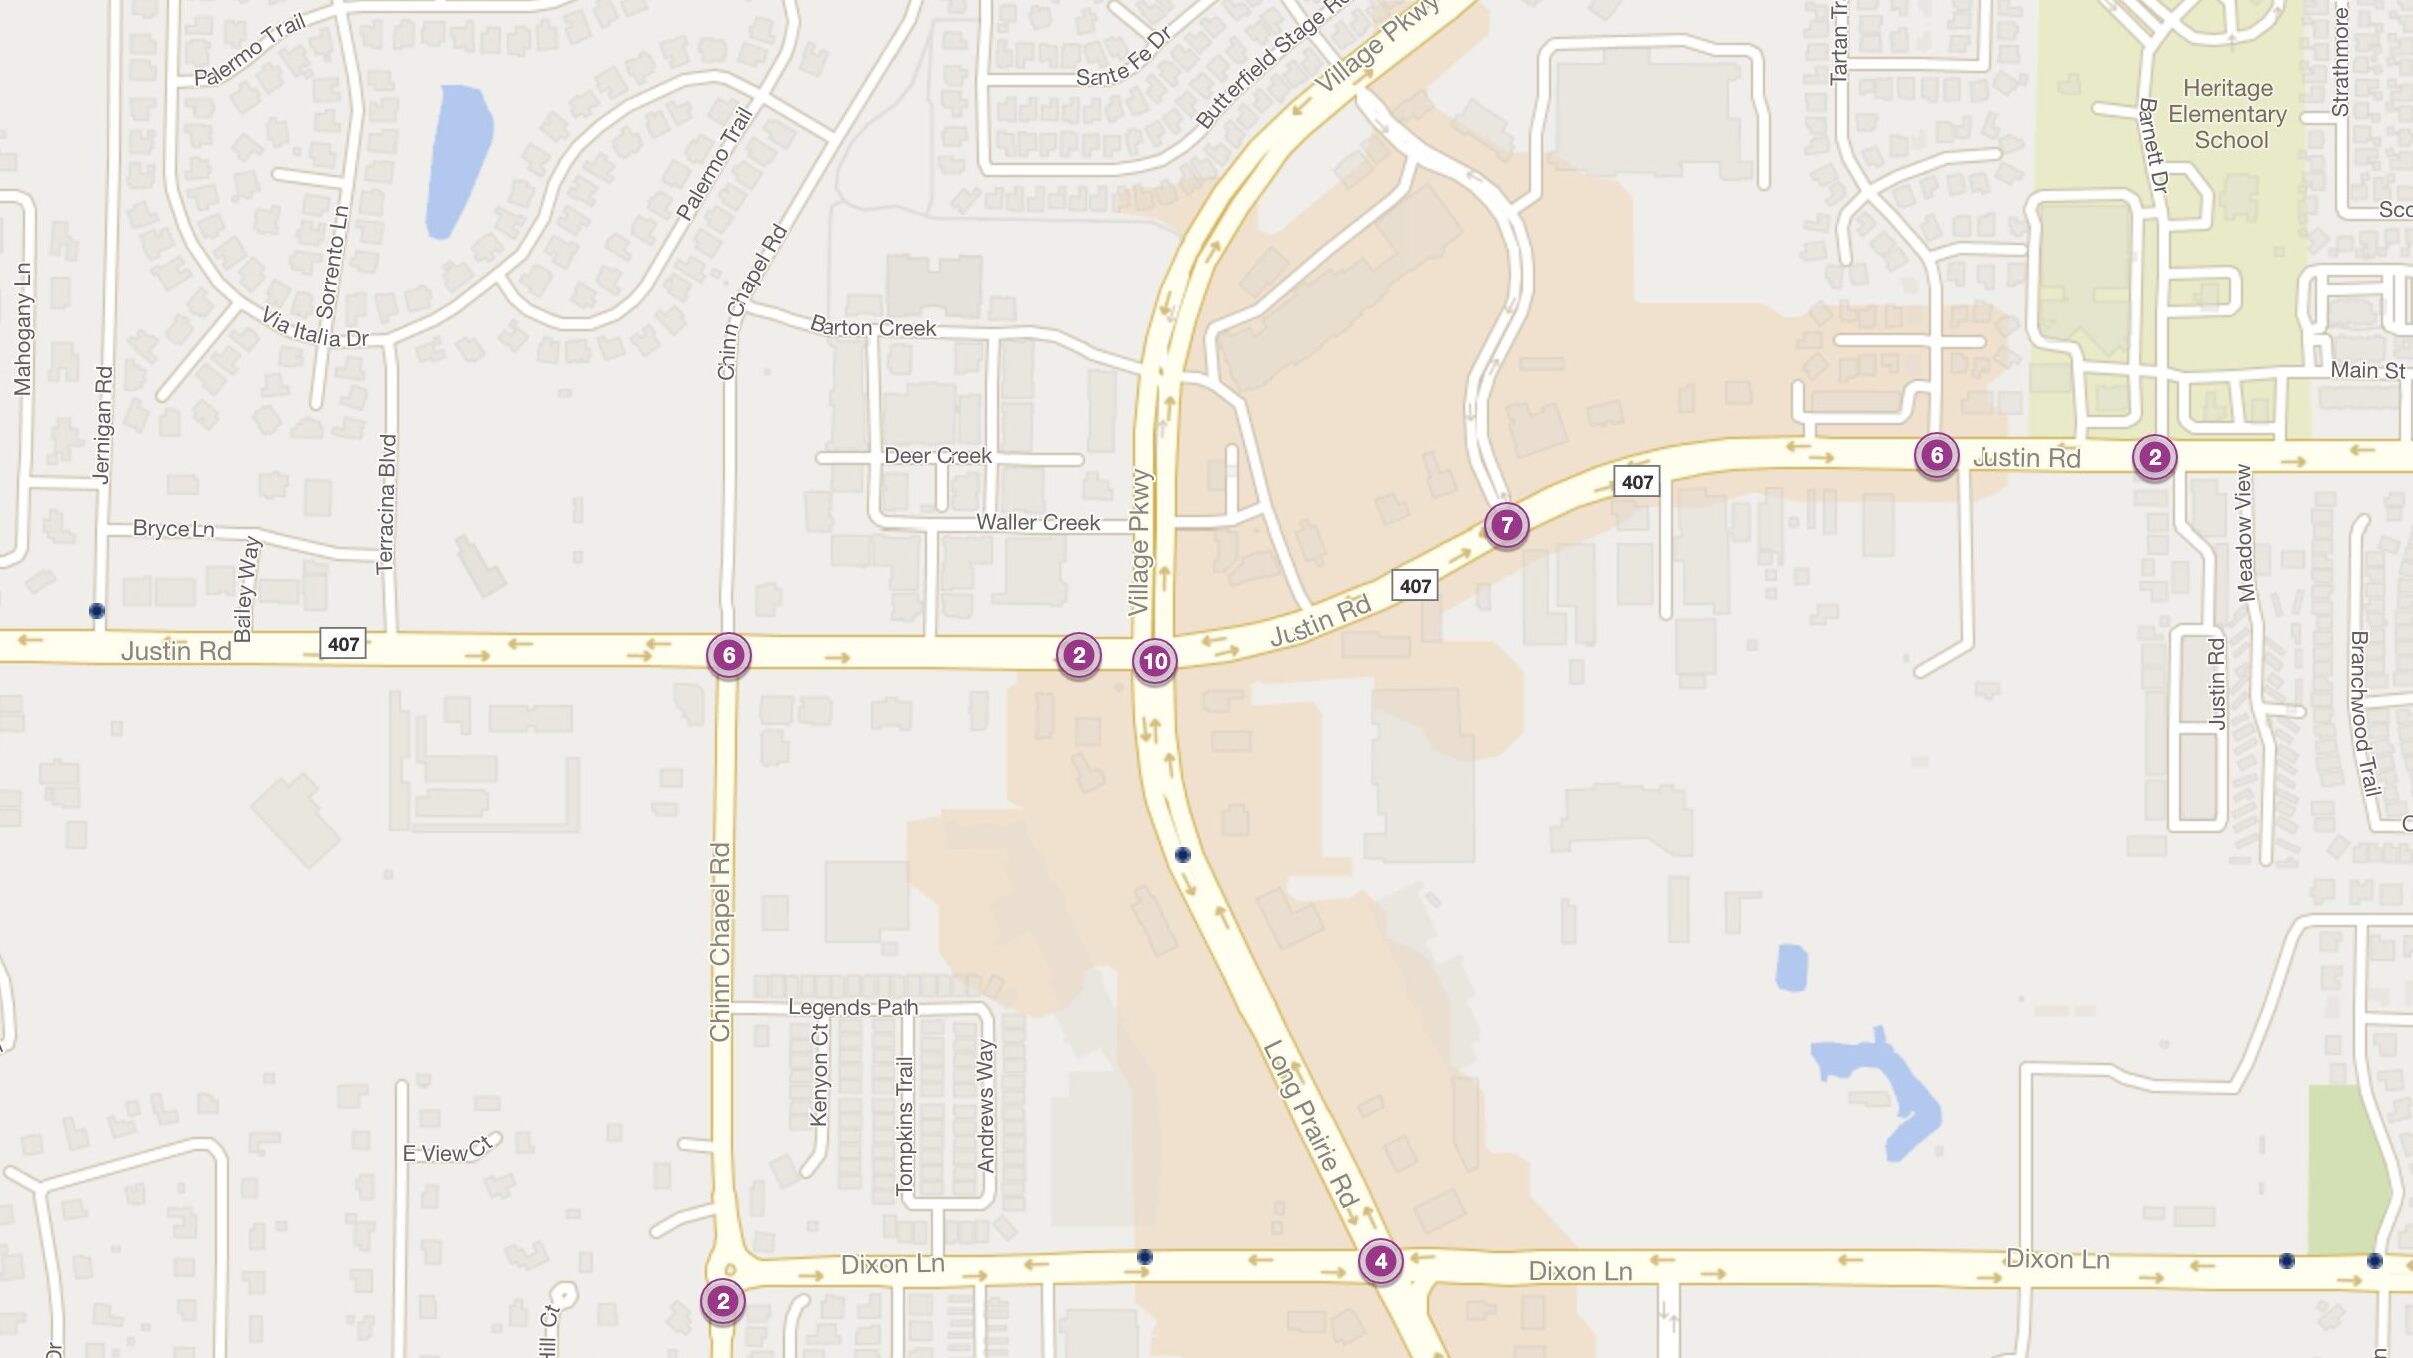 Cluster Map of 2023 Car Accidents at Village Pkwy. & Justin Rd. (TXDOT)